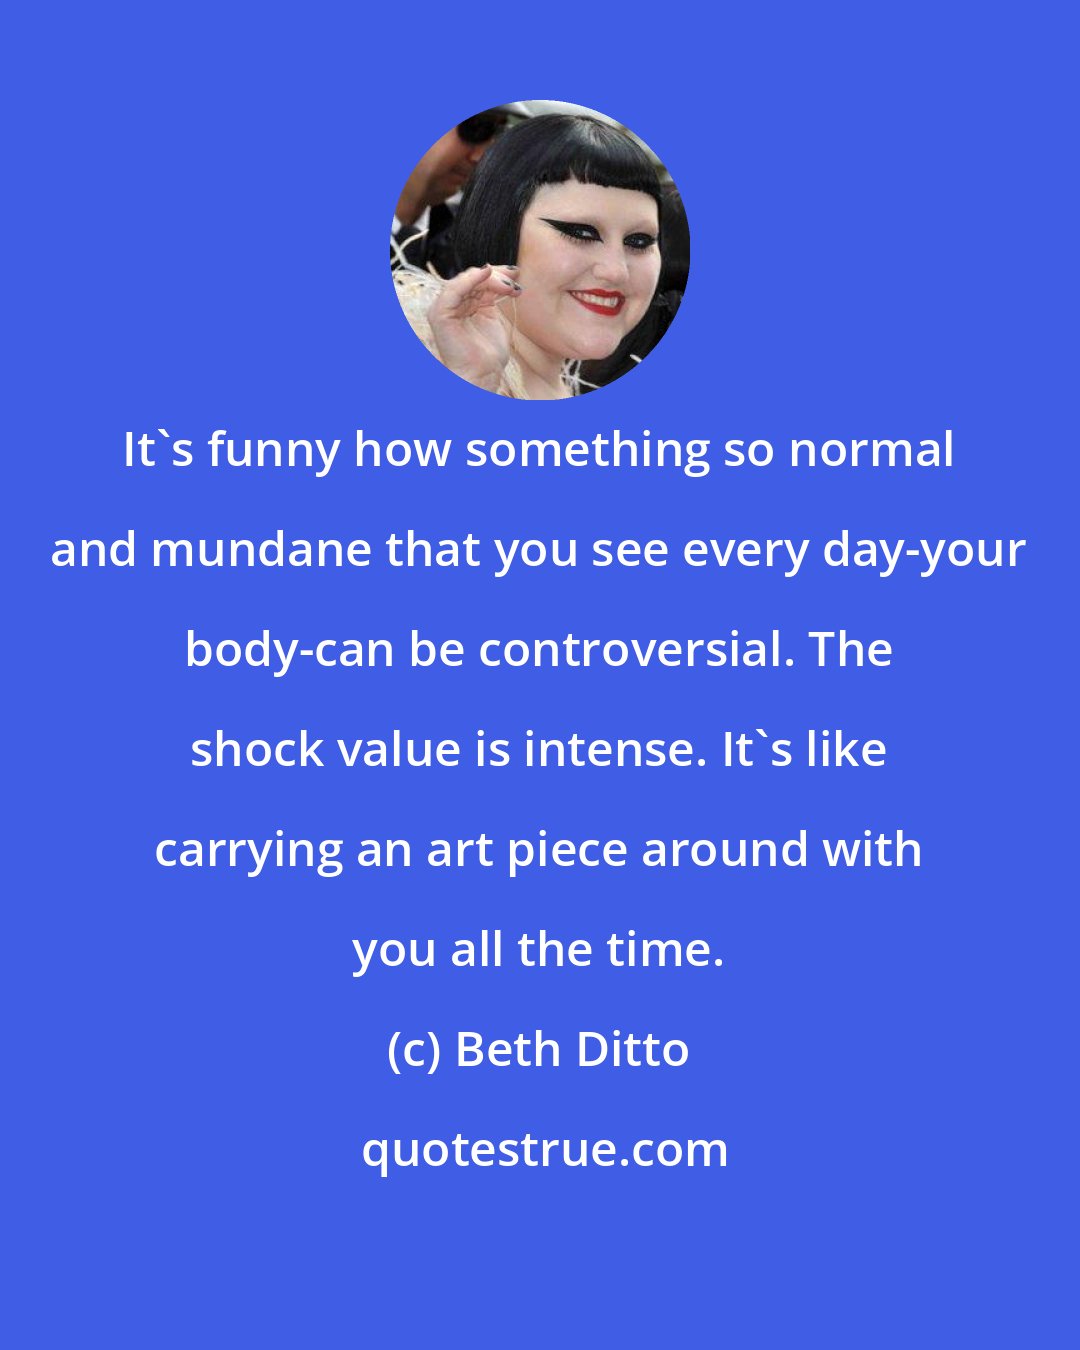 Beth Ditto: It's funny how something so normal and mundane that you see every day-your body-can be controversial. The shock value is intense. It's like carrying an art piece around with you all the time.